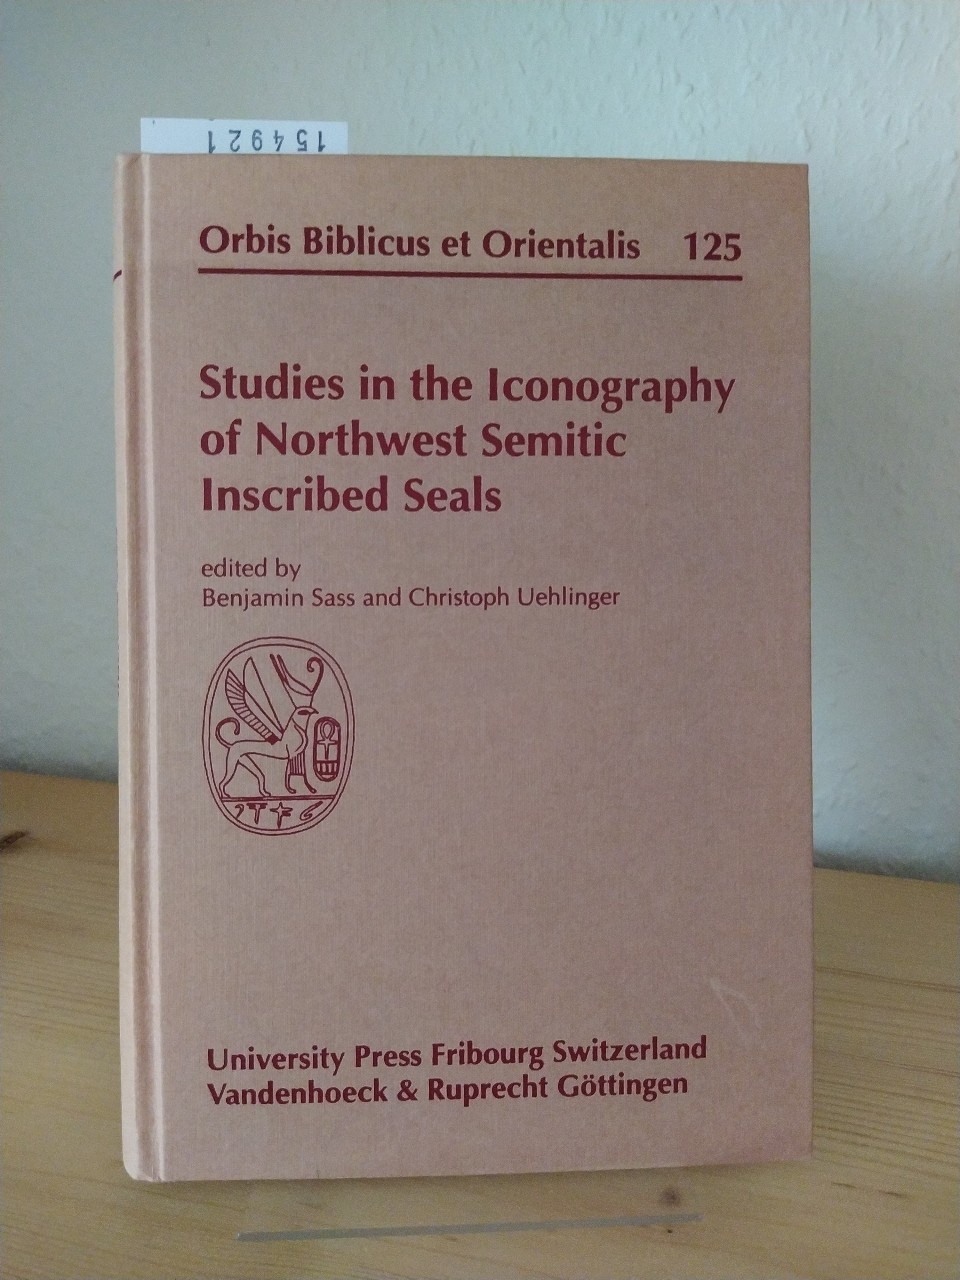 Studies in the iconography of Northwest Semitic inscribed seals. Proceedings of a symposium held in Fribourg on April 17 - 20, 1991. [Edited by Benjamin Sass and Christoph Uehlinger]. (= Orbis biblicus et orientalis, 125). - Sass, Benjamin (Hrsg.) and Christoph Uehlinger (Hrsg.)